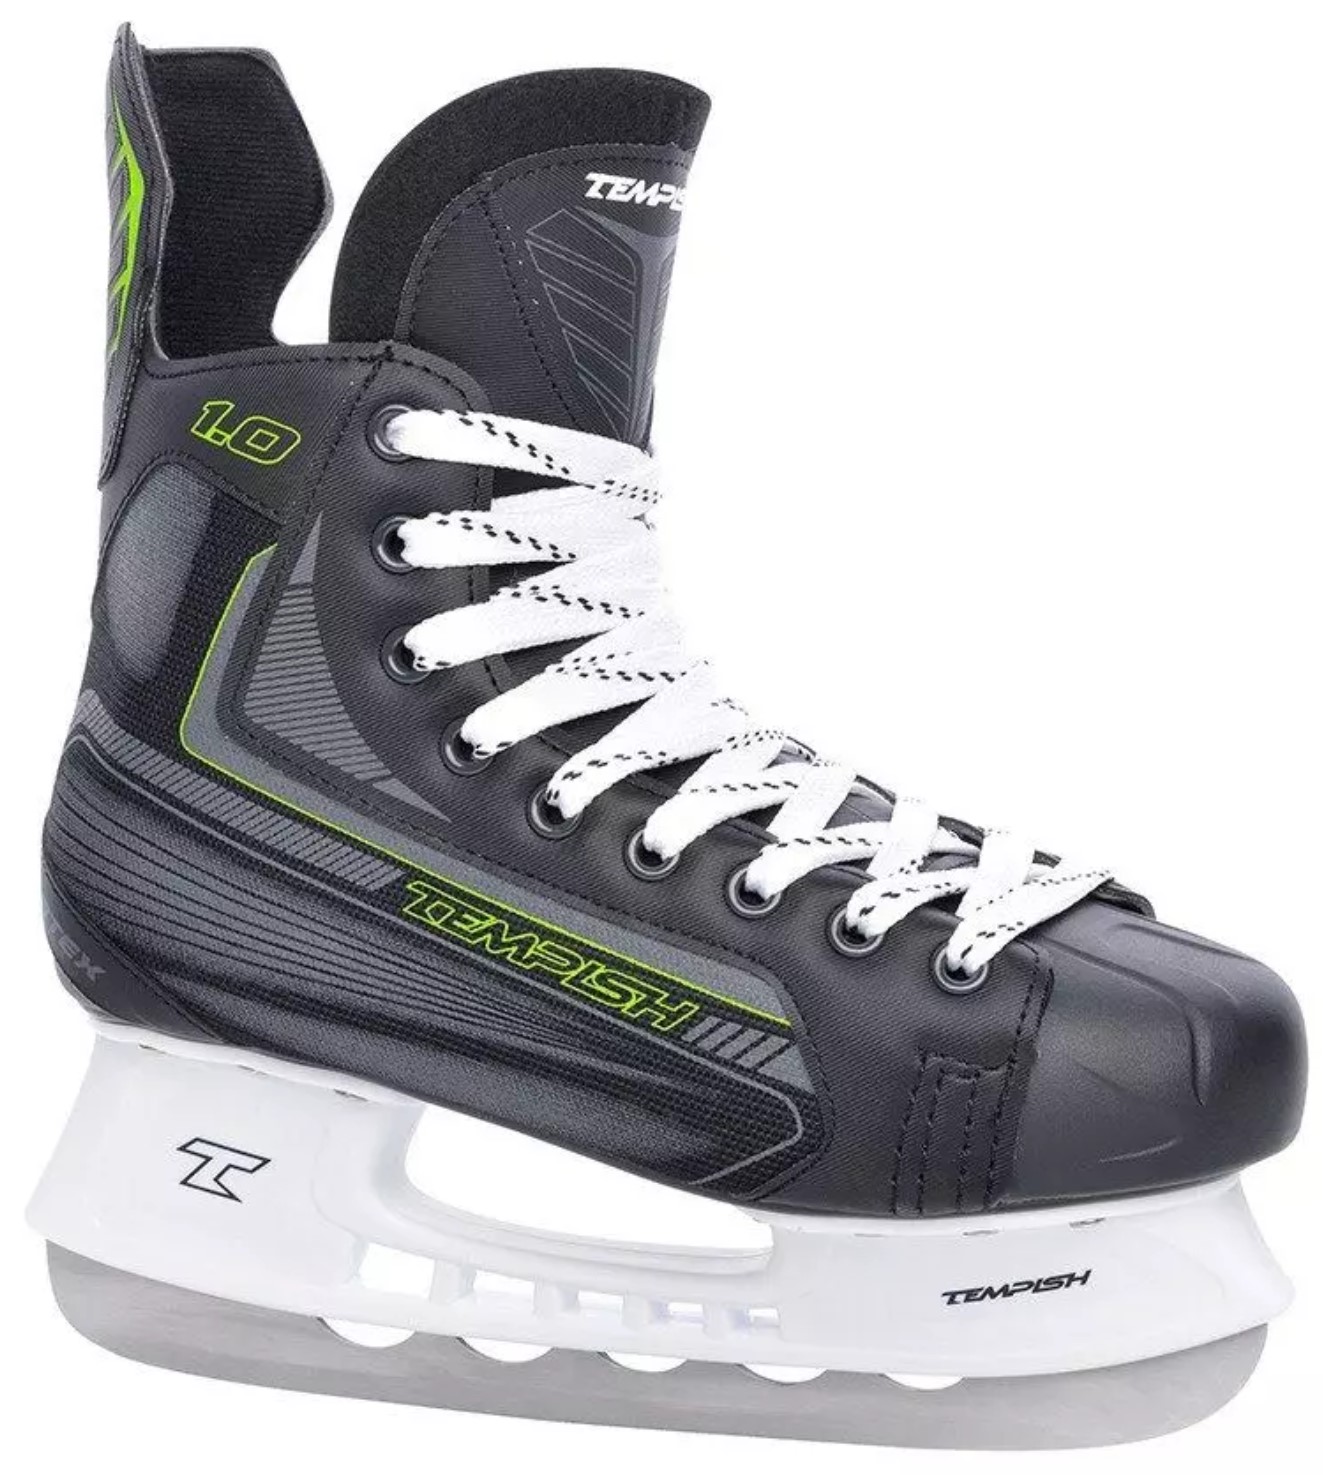 ice hockey skate Tempisch Wortex in black with green accents